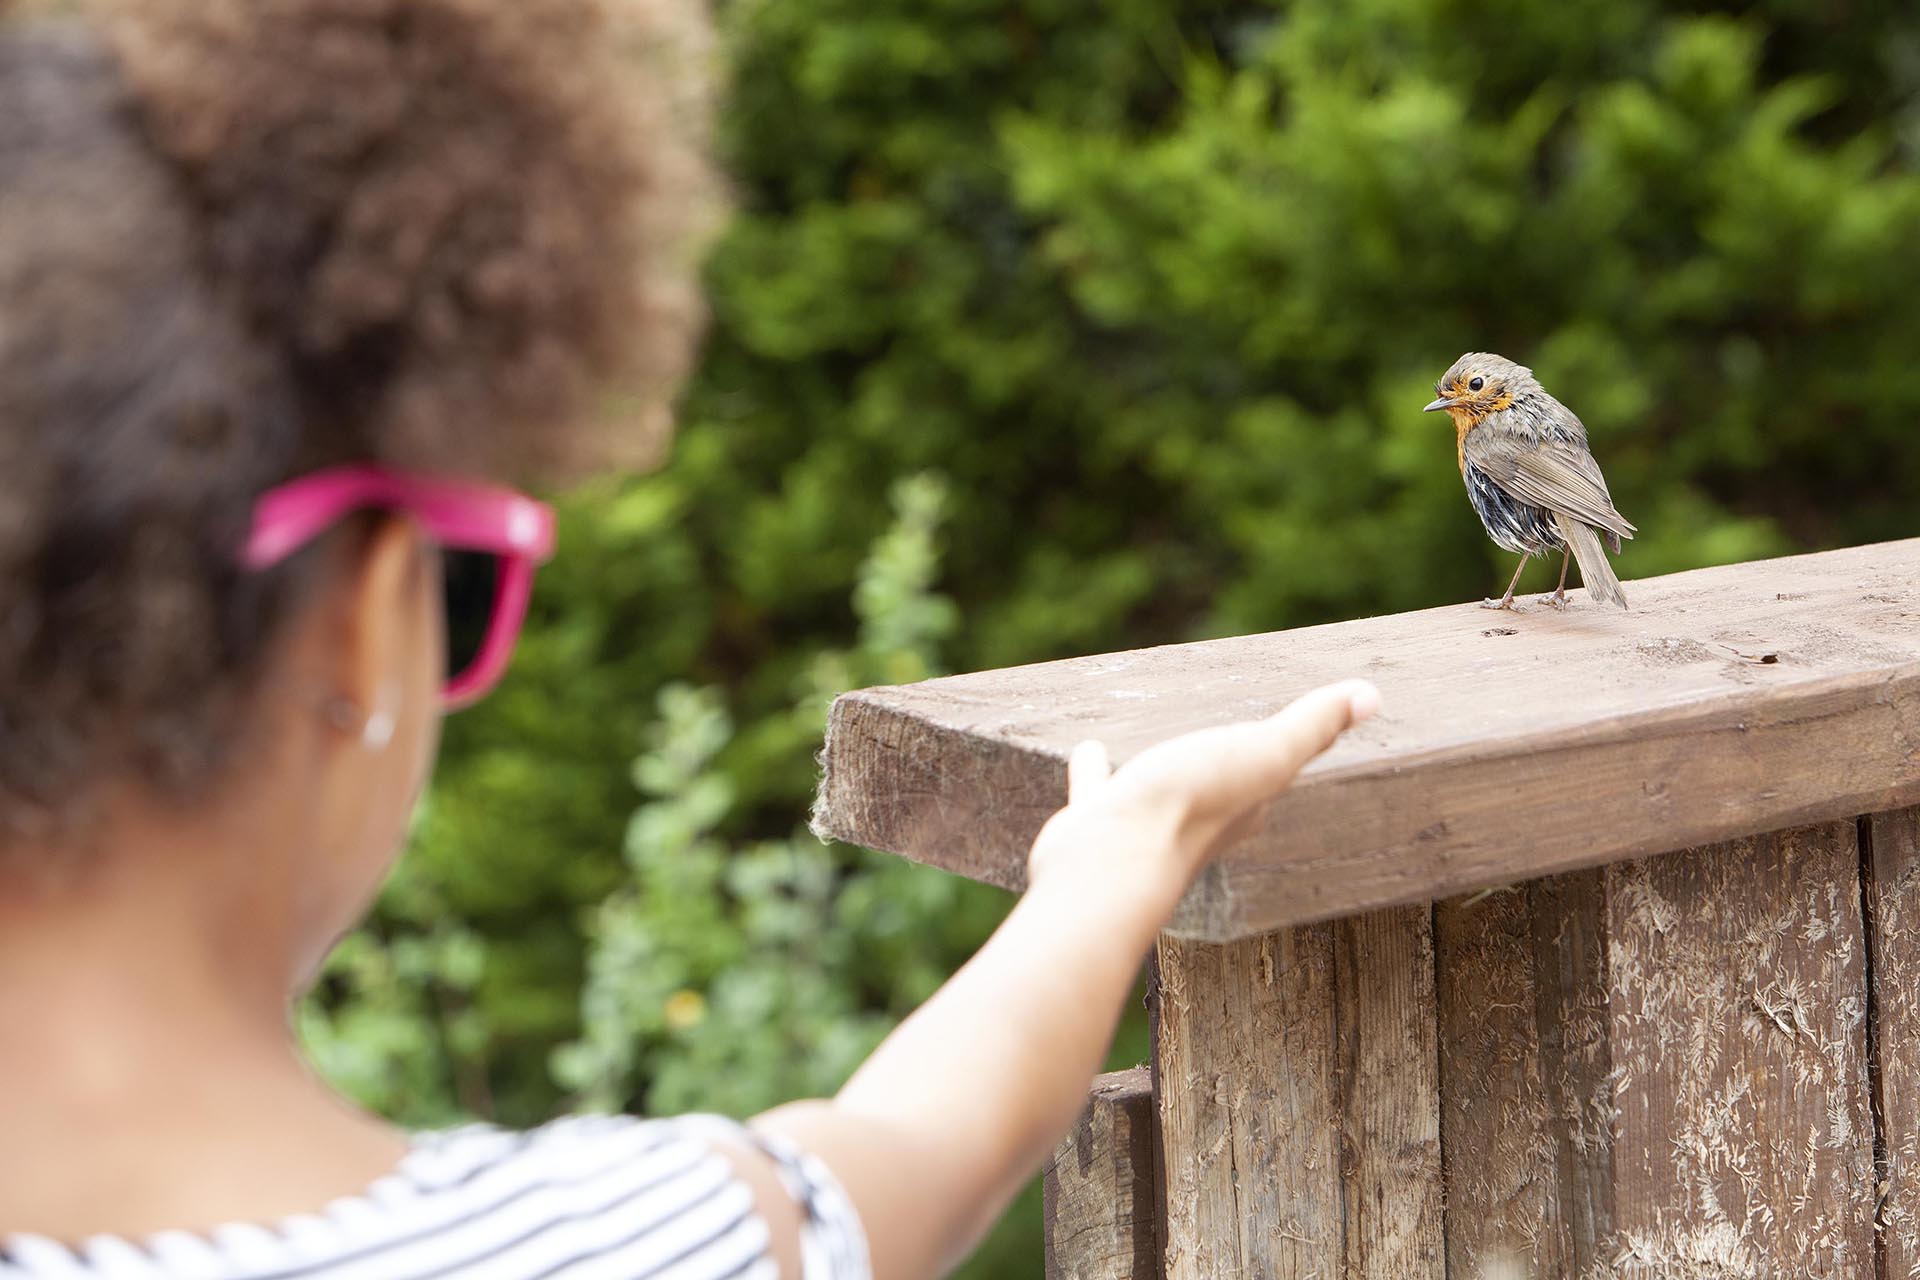 A small child reaches out to a small bird